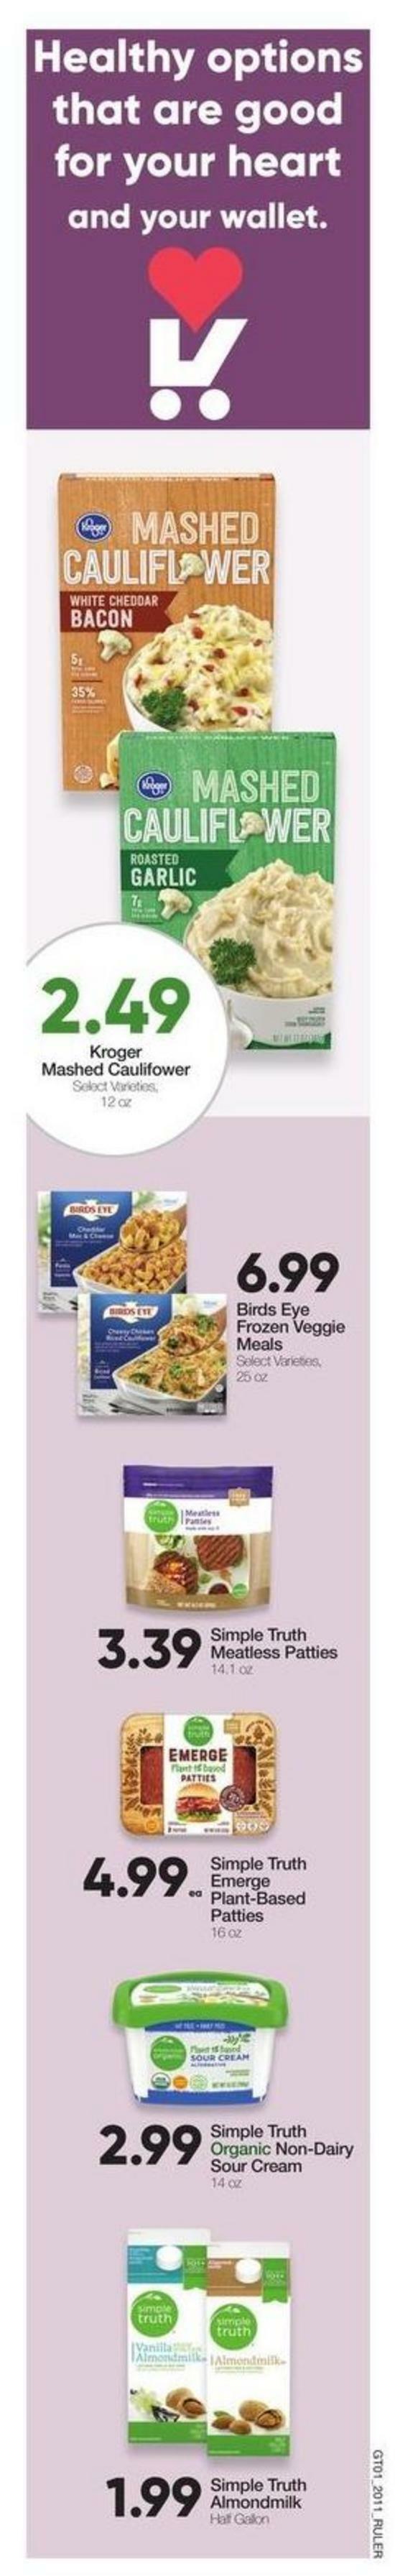 Ruler Foods Weekly Ad from April 16